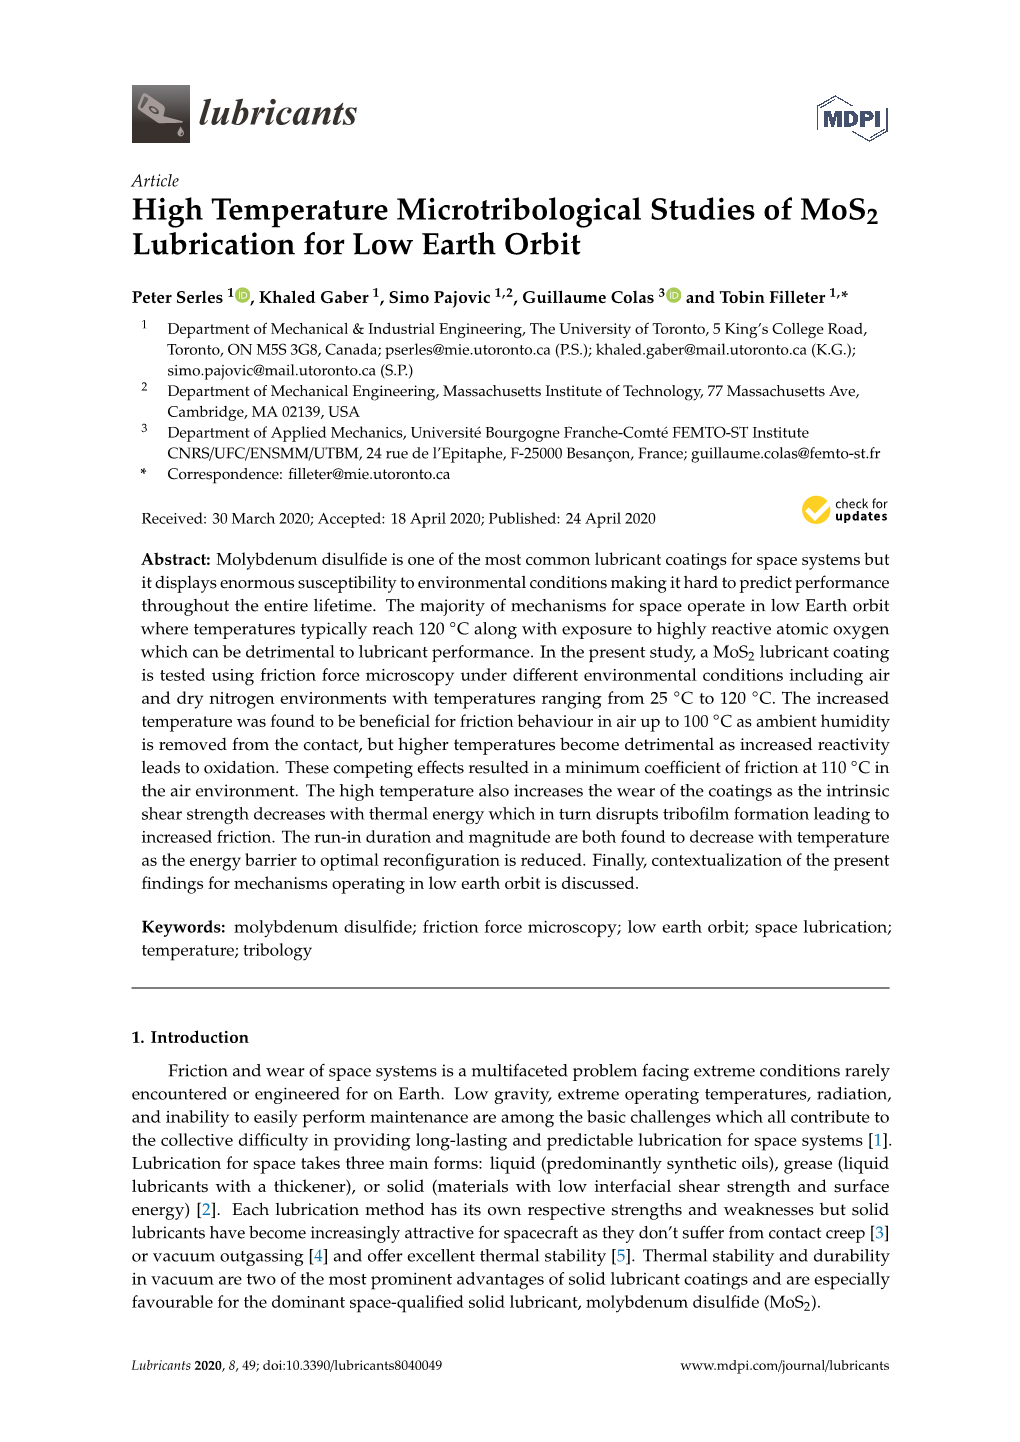 High Temperature Microtribological Studies of Mos2 Lubrication for Low Earth Orbit